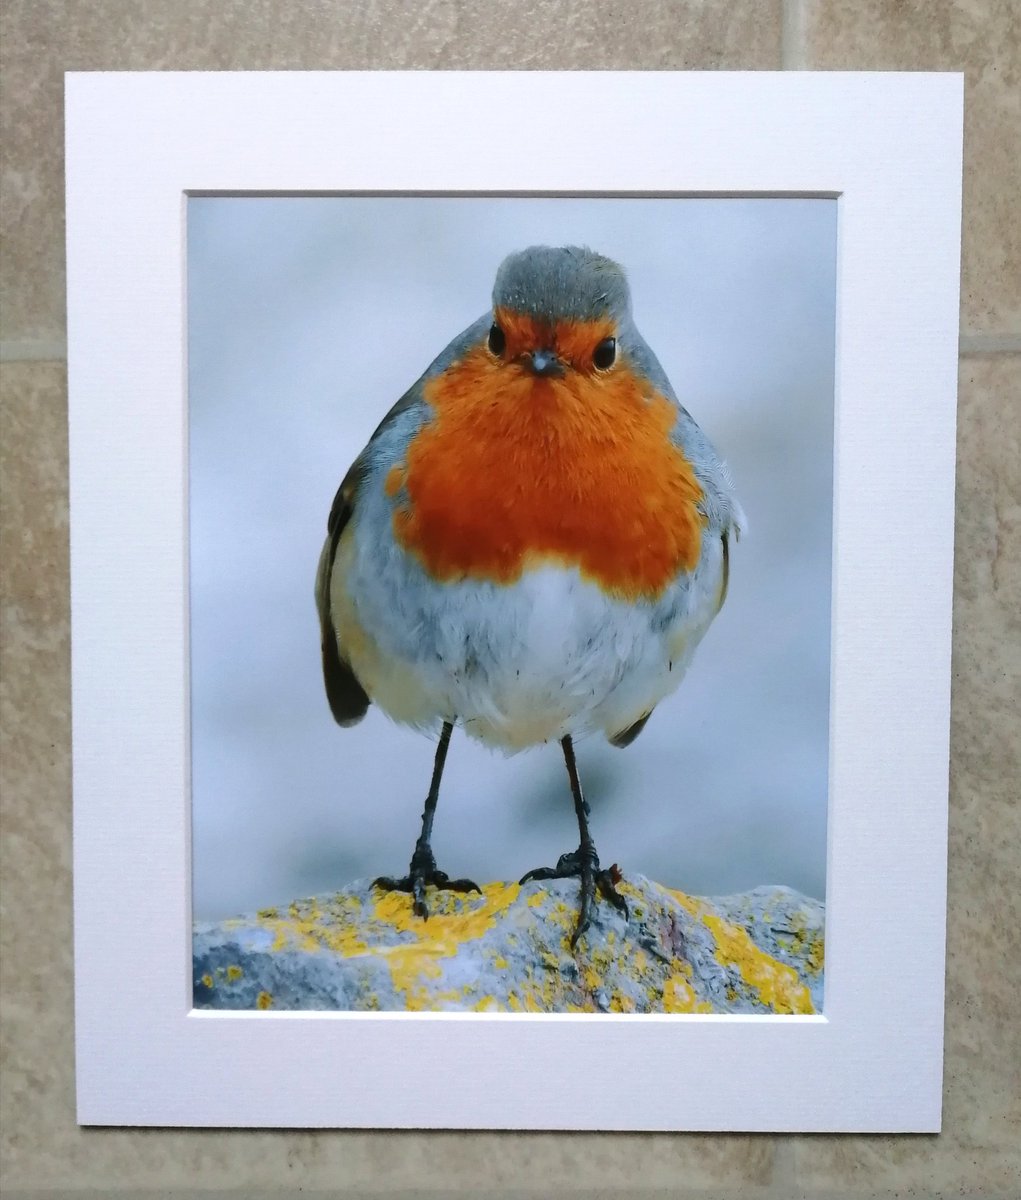 'Grumpy Robin on a rock' - 10x8 mounted print.  You can buy it here; https://www.carlbovis.com/product-page/grumpy-robin-on-a-rock-10x8-mounted-print 